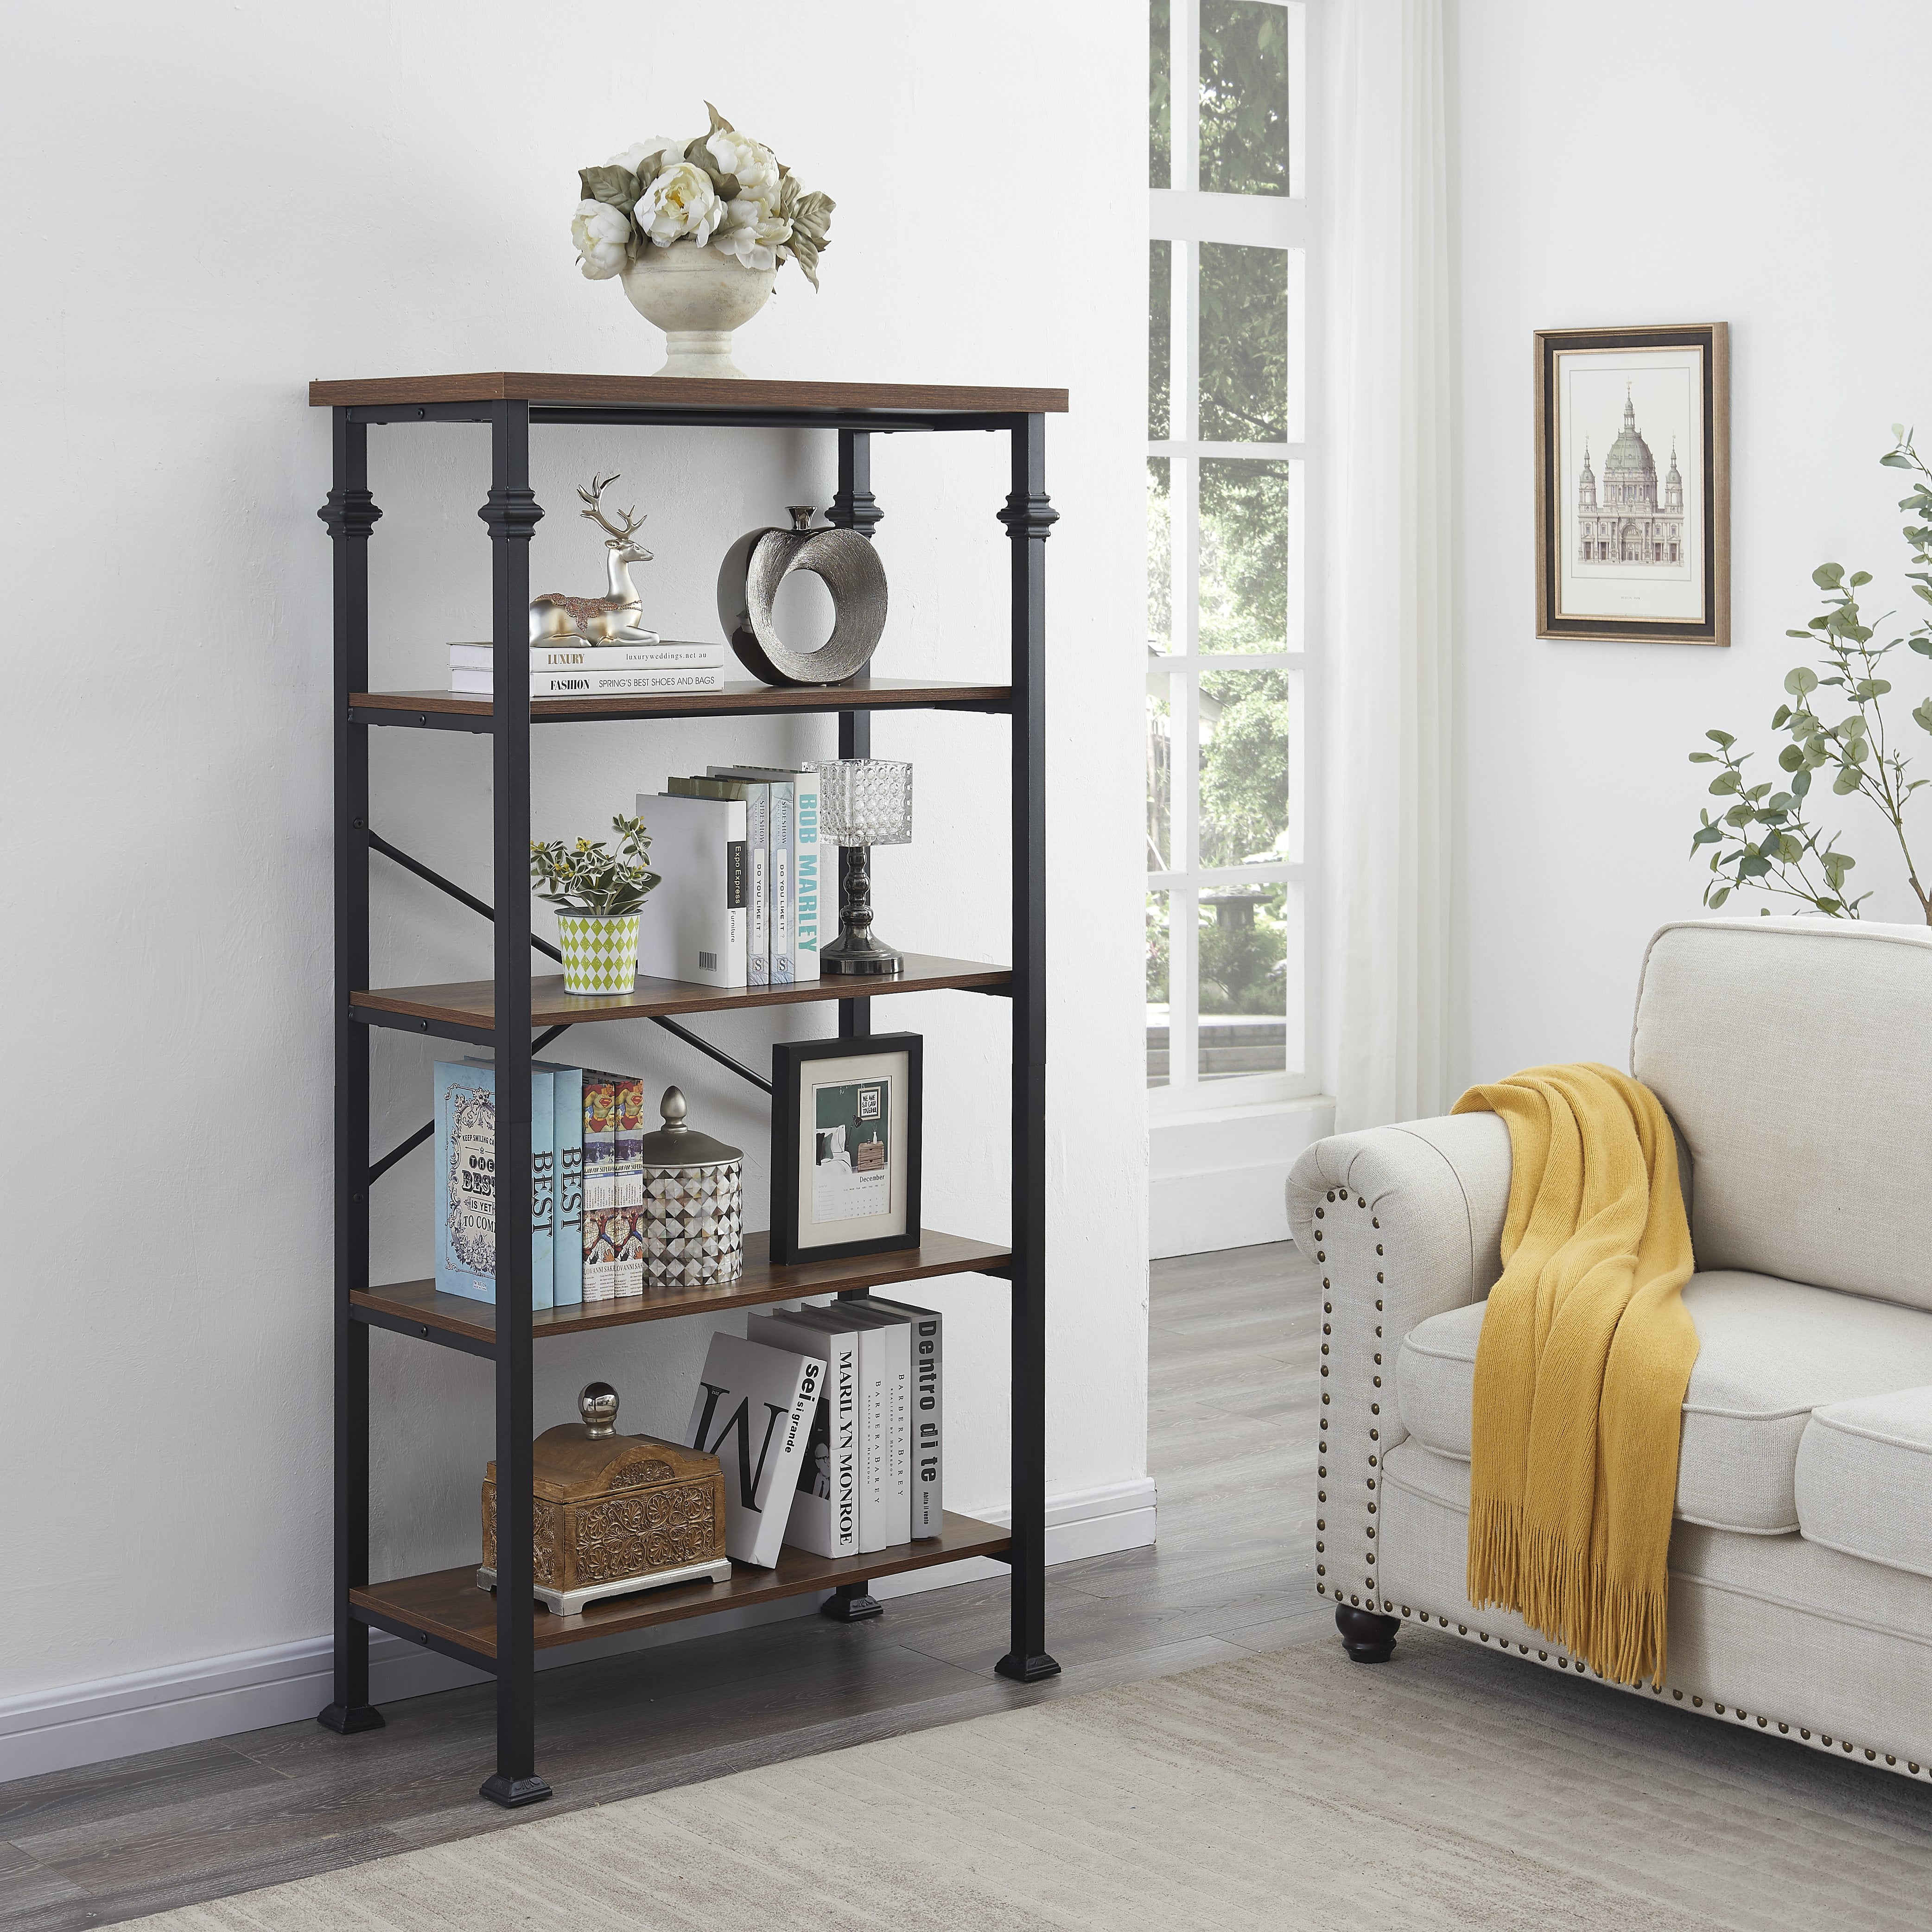 Kinwell 5 Tier Industrial Bookshelf, Room And Board Bookcases Standing Shelves